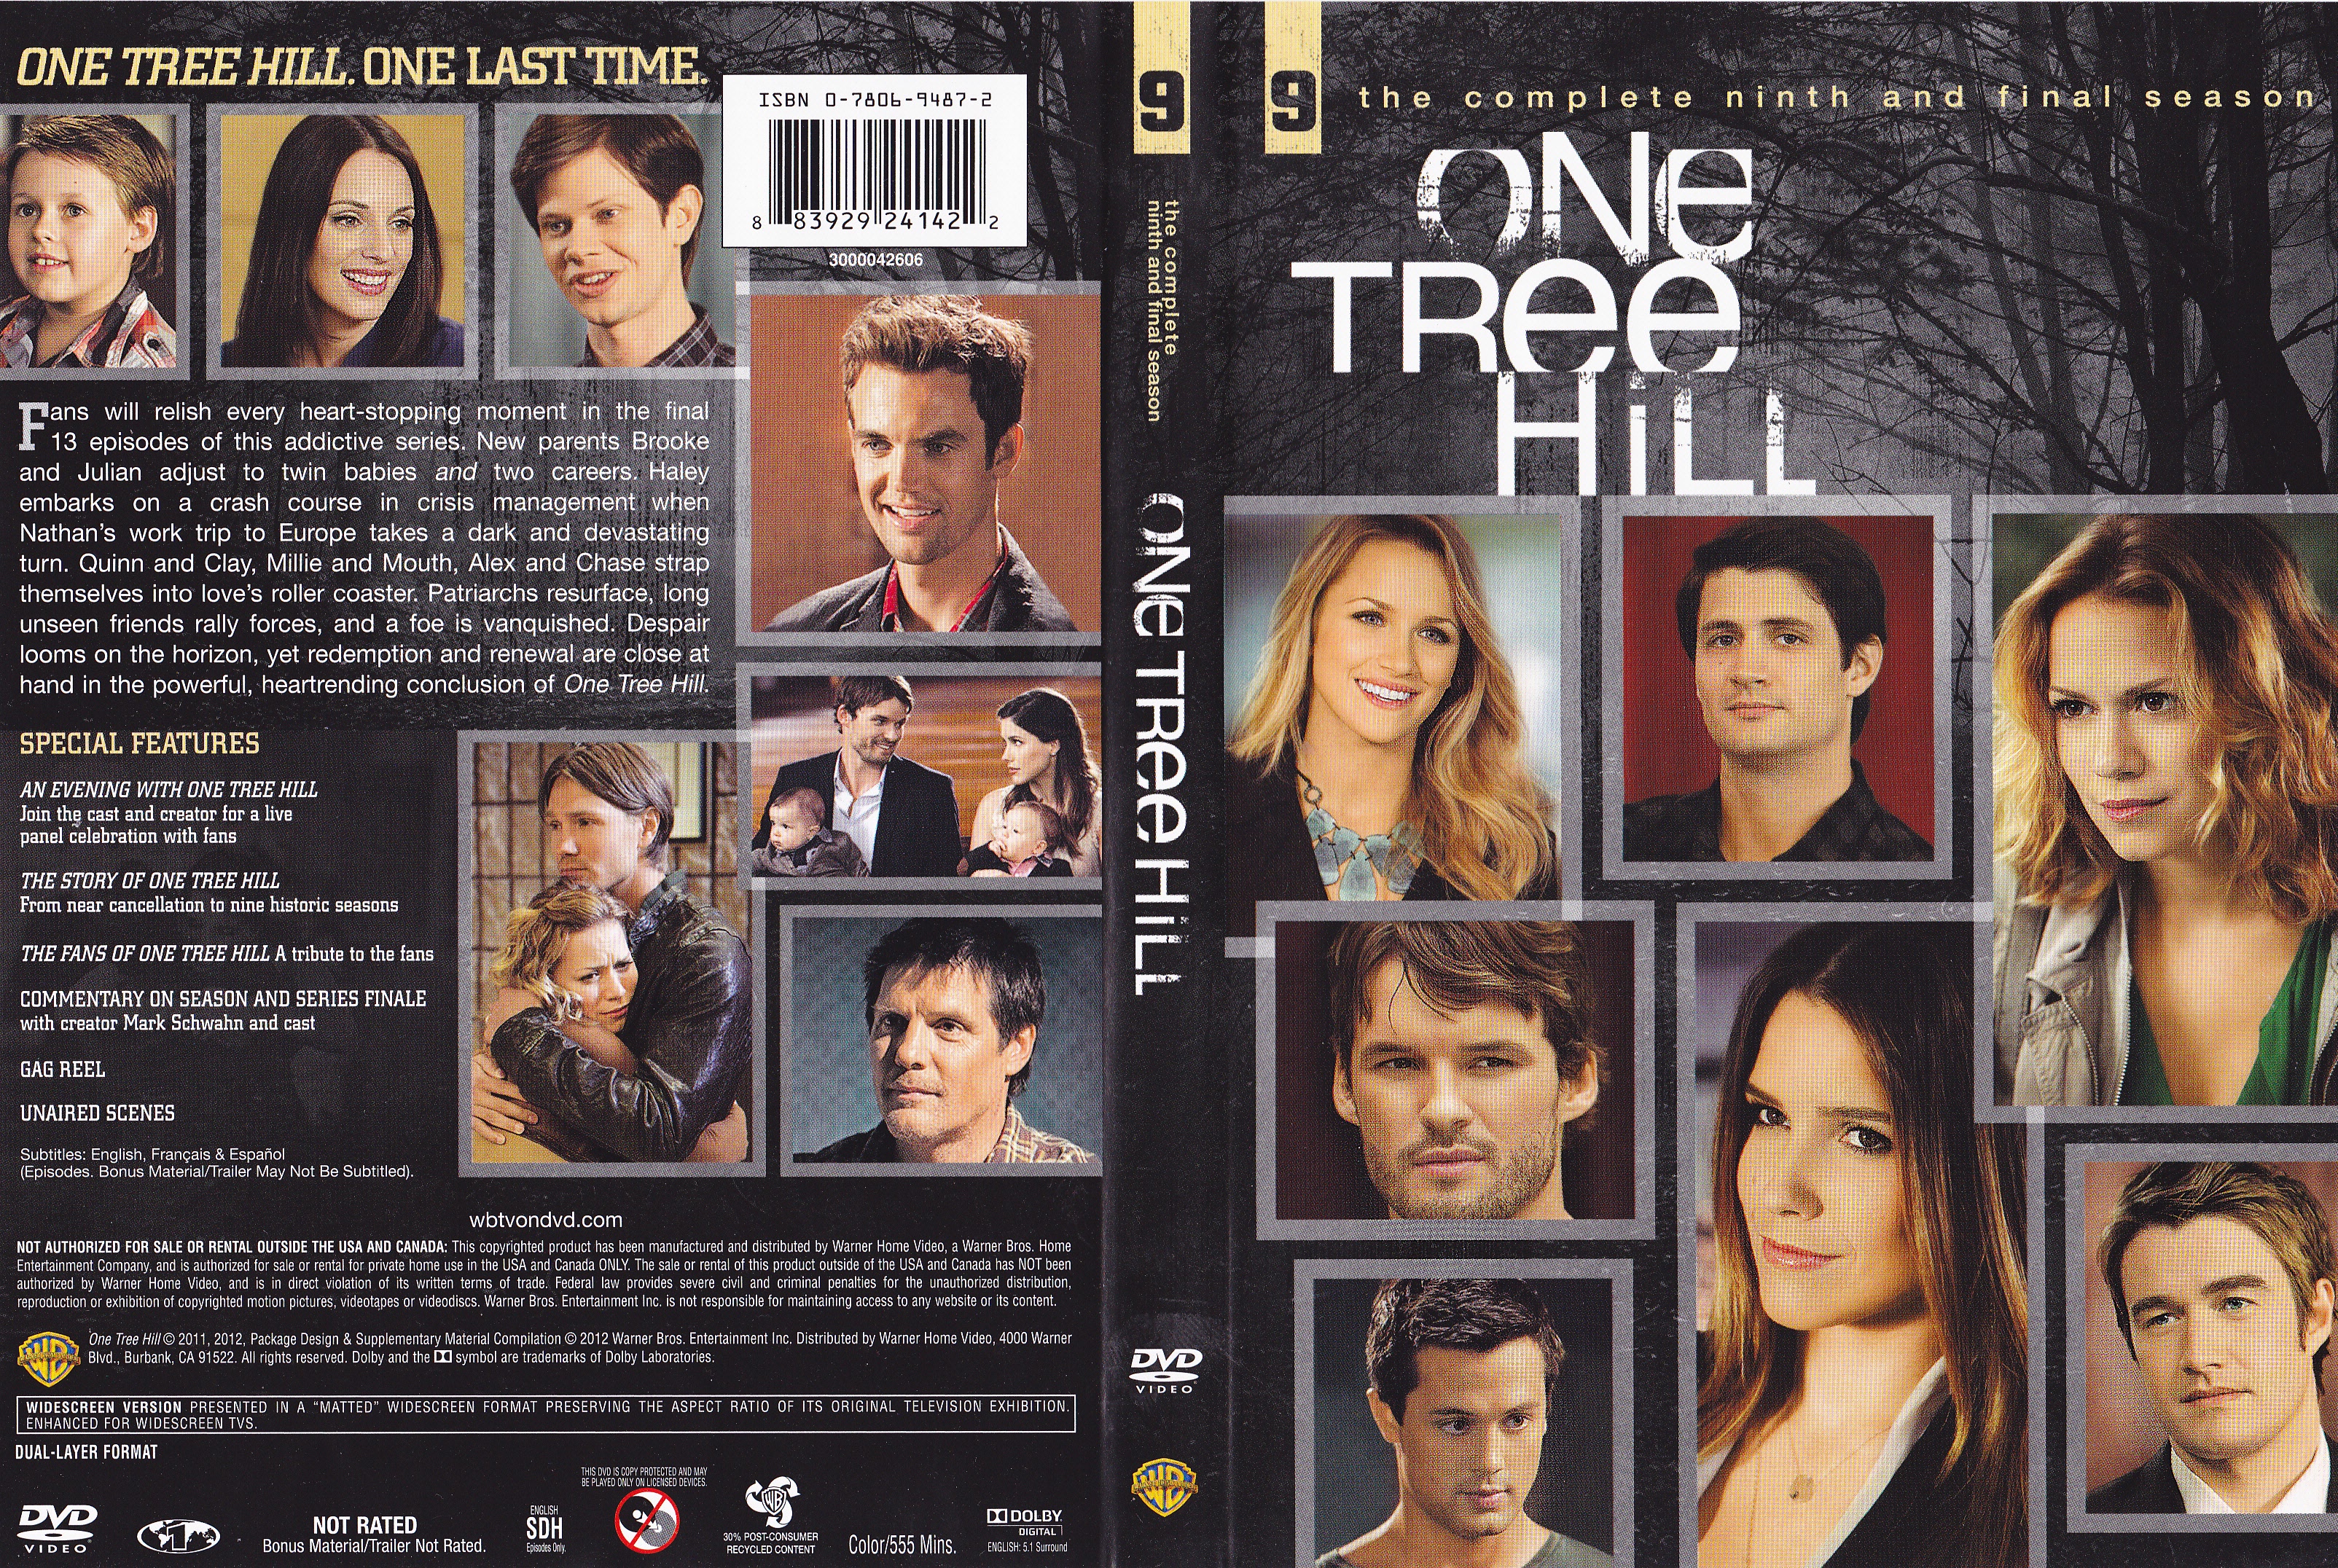 Jaquette DVD One Tree hill Saison 9 Zone 1